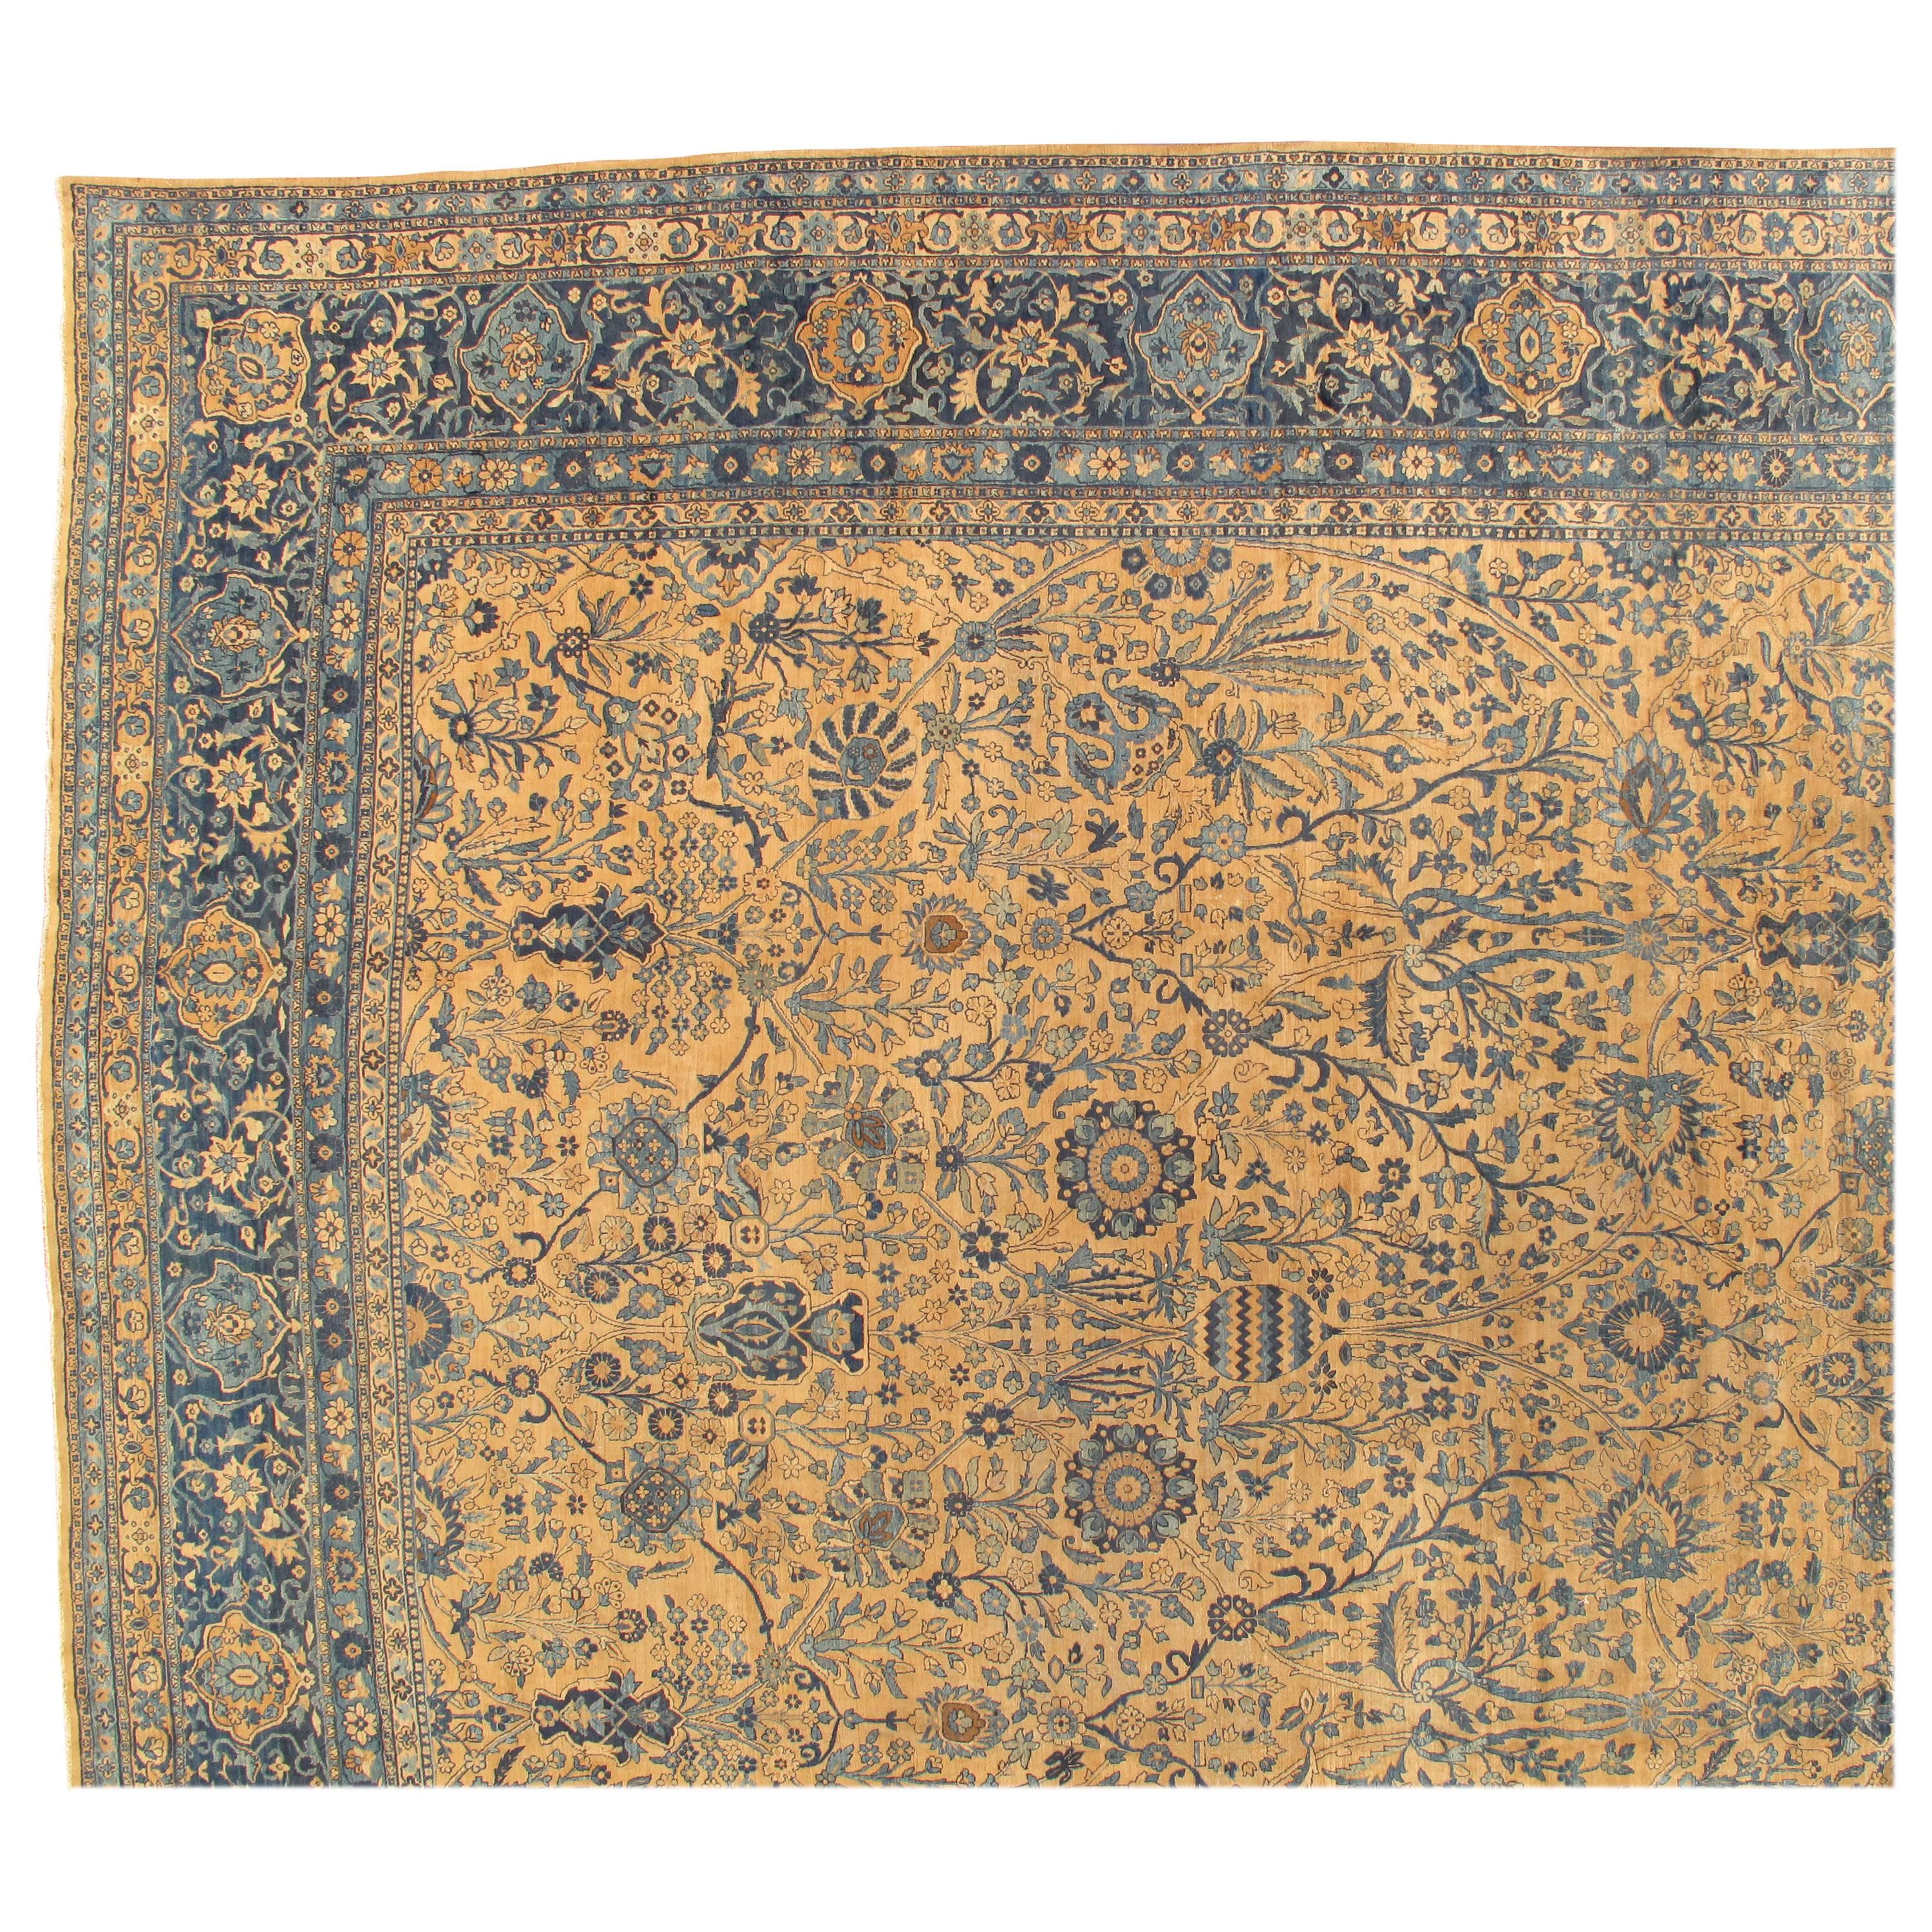 This master crafted Persian Laver Kirman carpet exemplifies the profound understanding of the artistic principles of balance and harmony that make art level antique rugs so inspiring to live with. Indicative of the best classical Persian carpets of